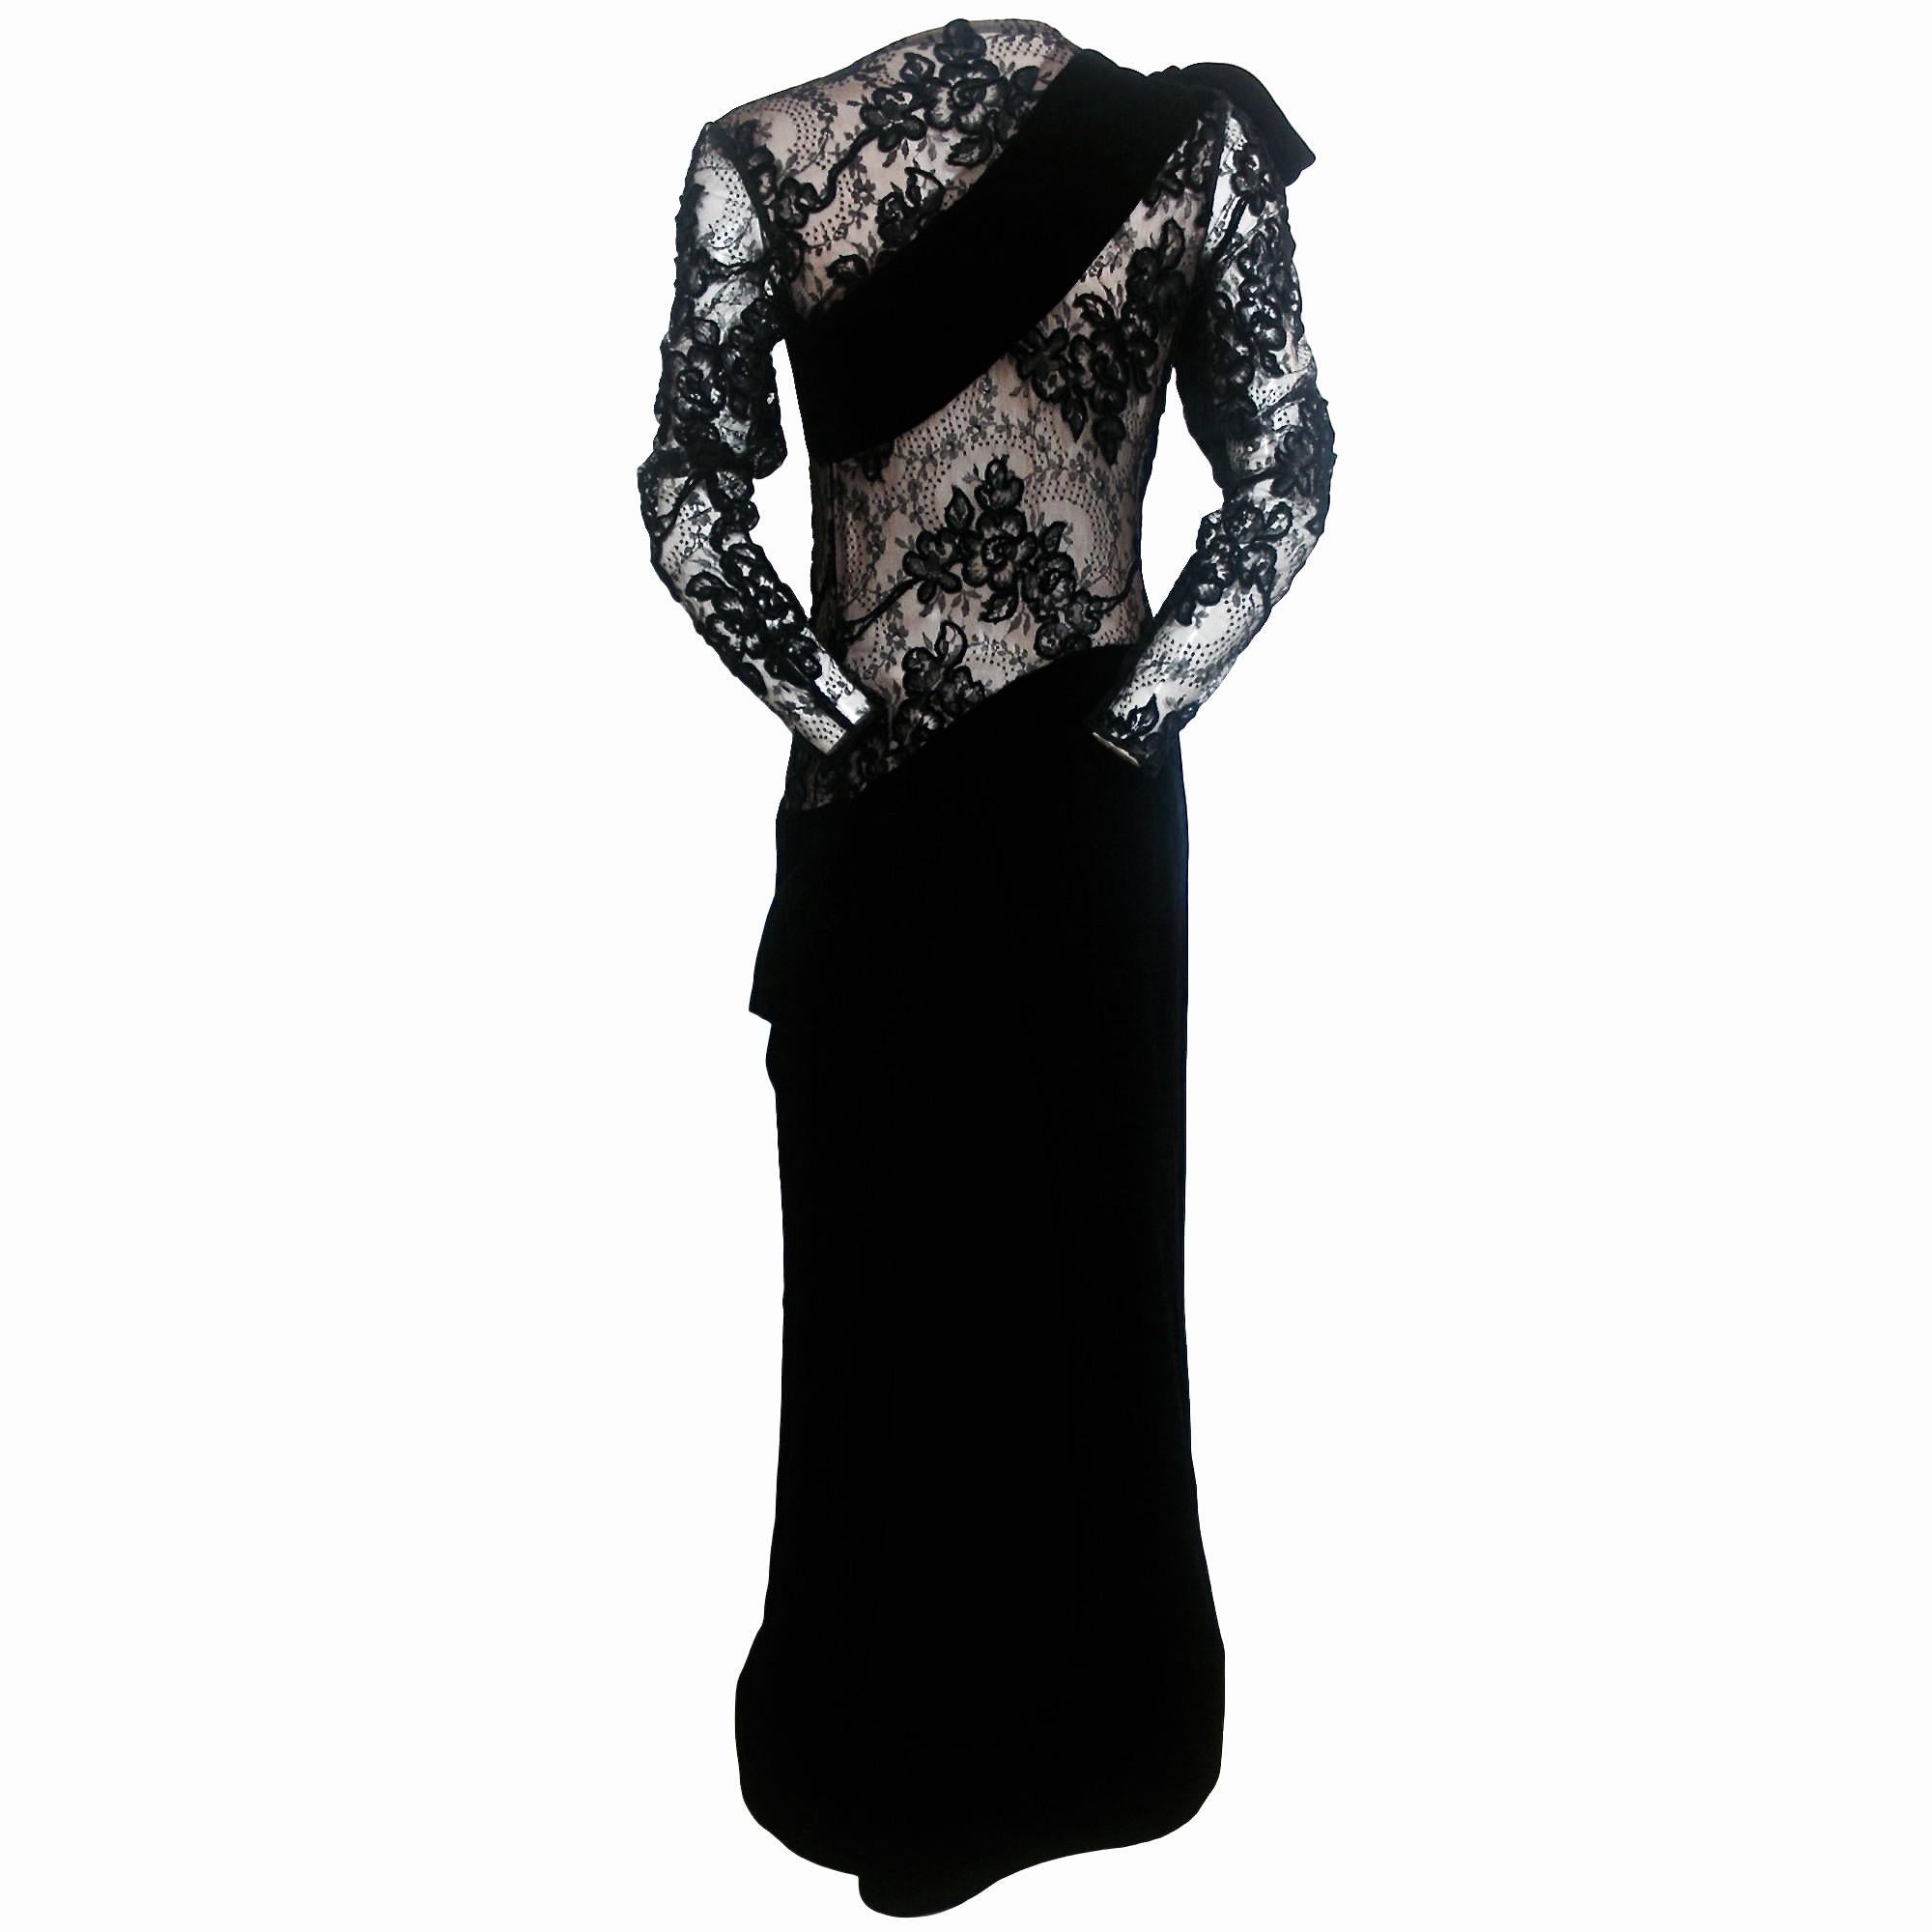 Jacqueline de Ribes Velvet and Lace Evening dress with Large Bows For Sale 8